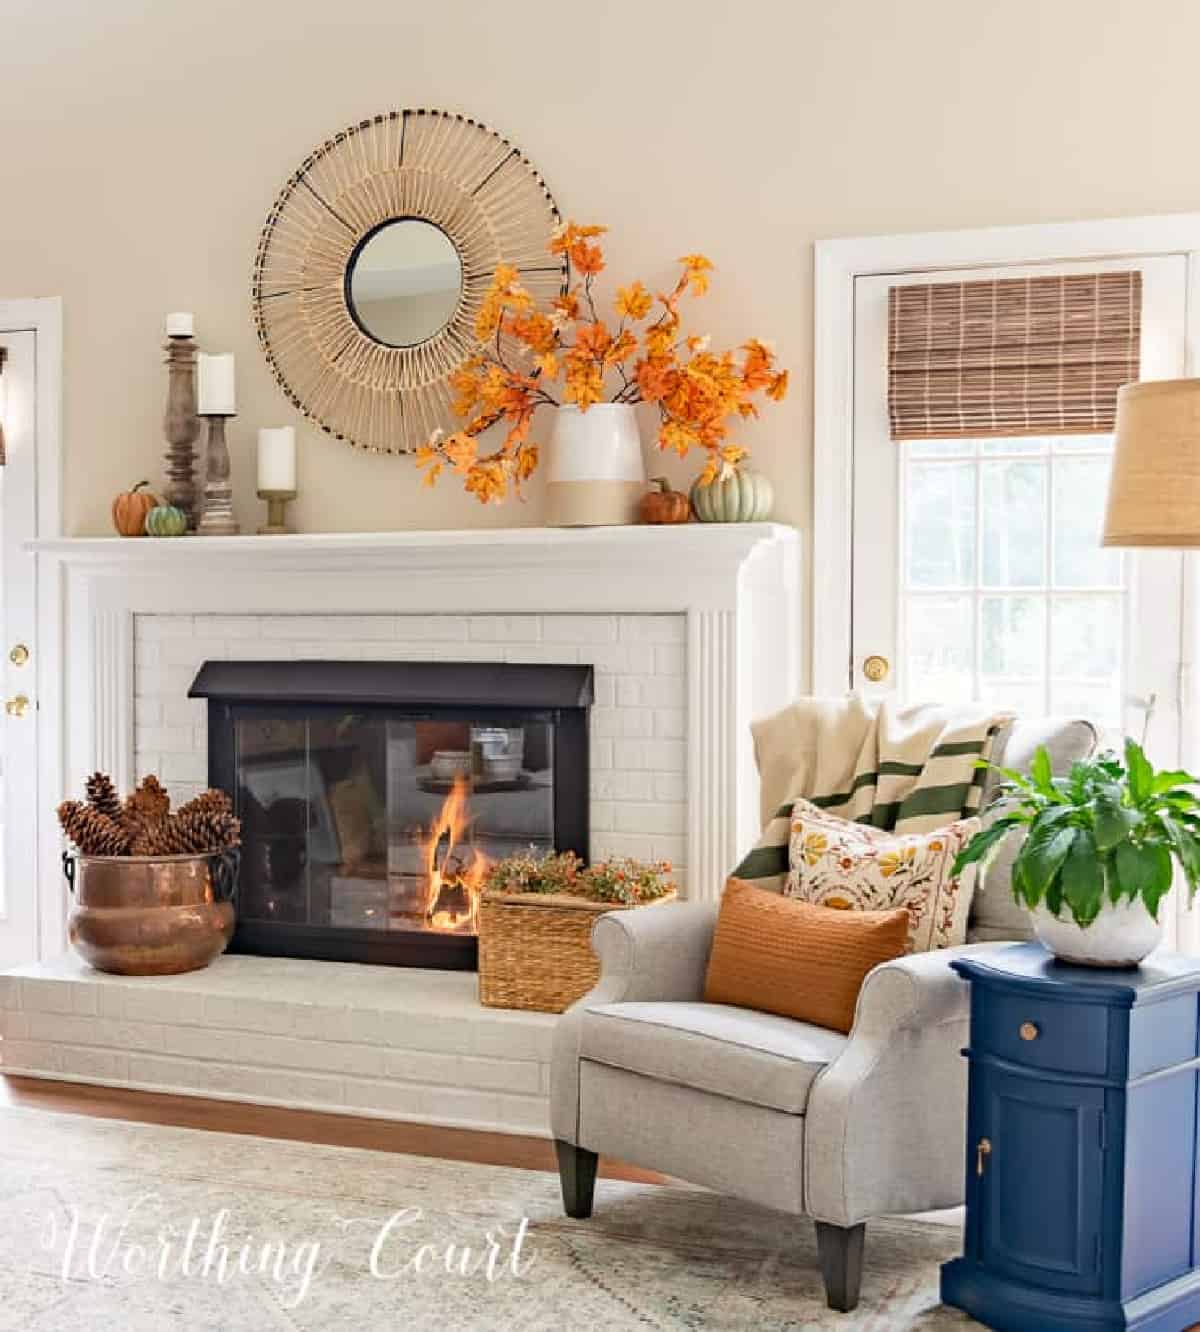 The Best Mantel And Fireplace Decorating Ideas For Fall - Worthing ...